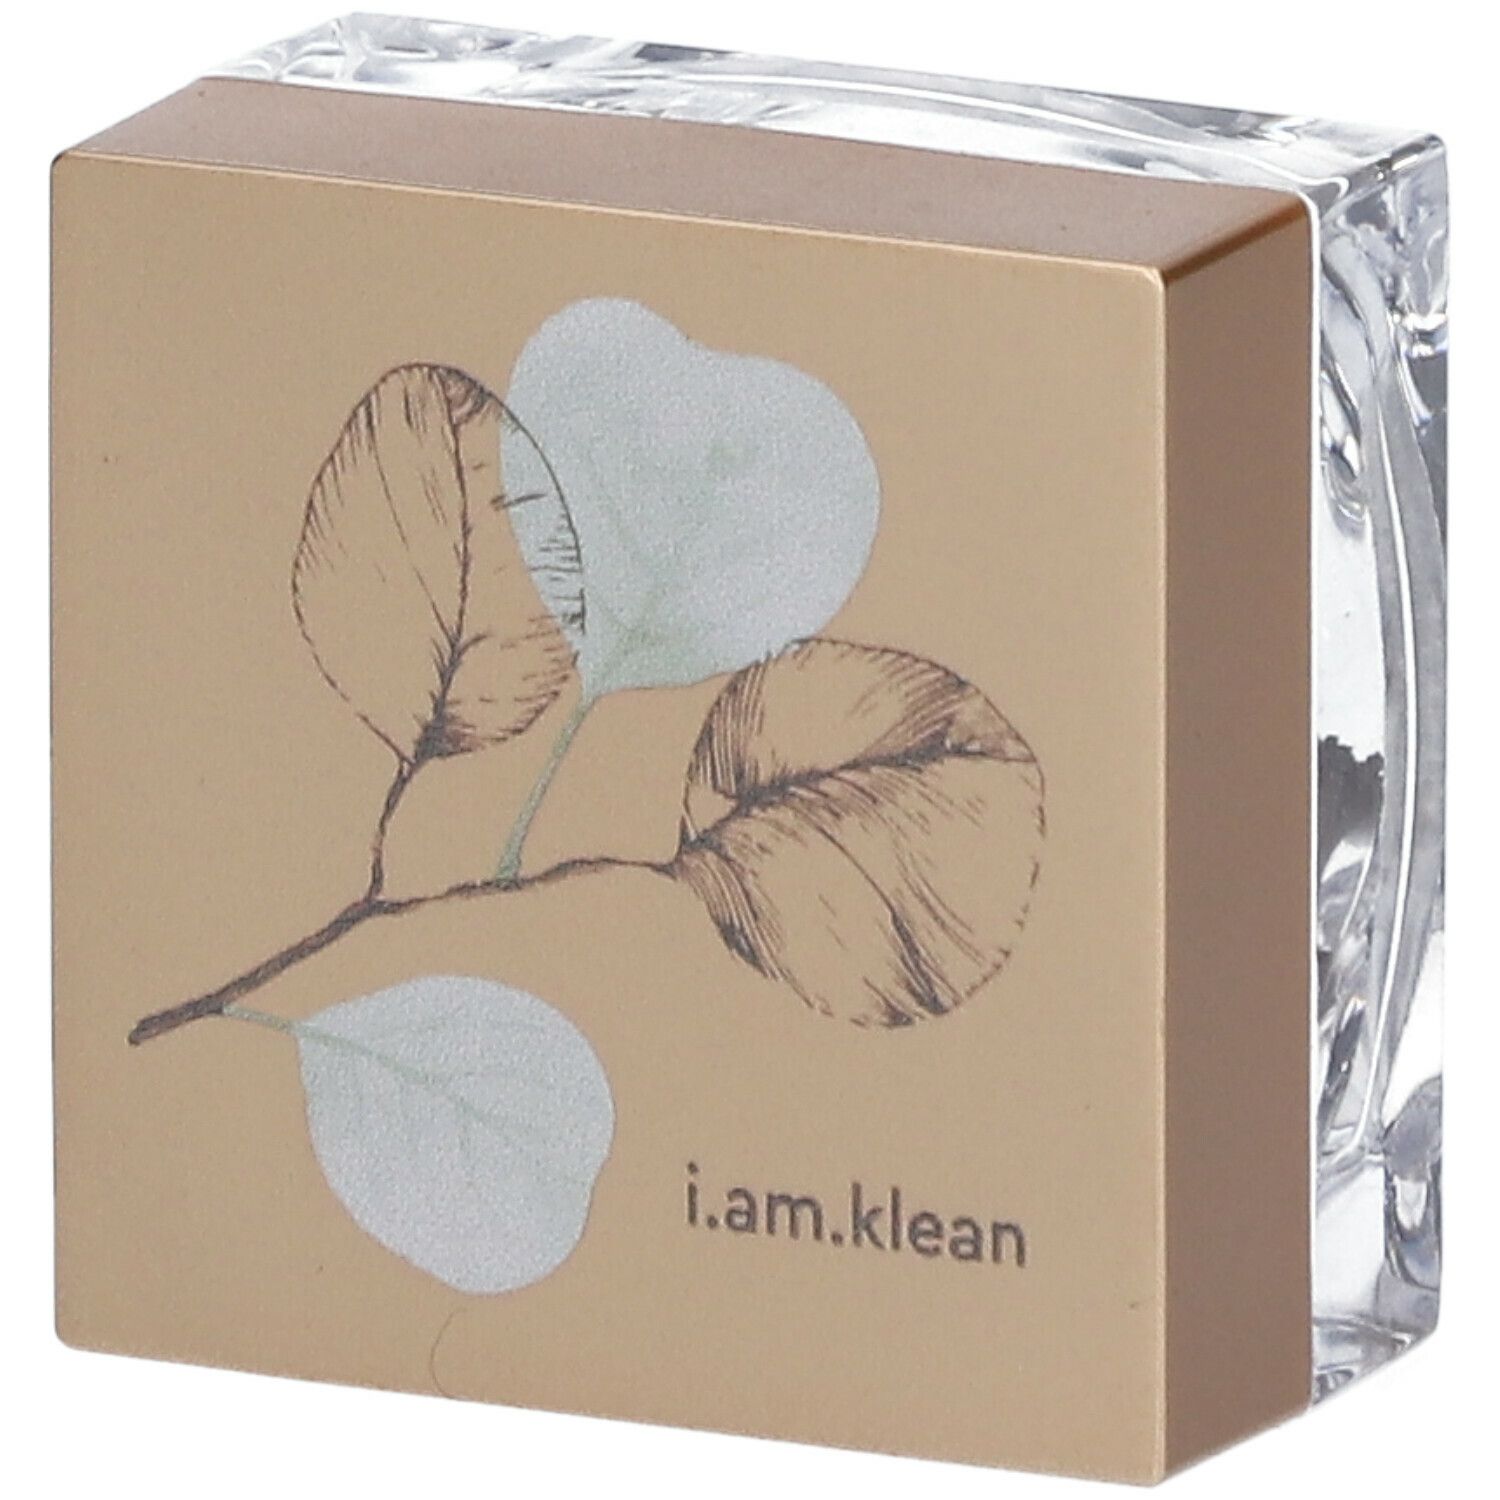 i.am.klean Loose Mineral Eyeshadow Tuned in